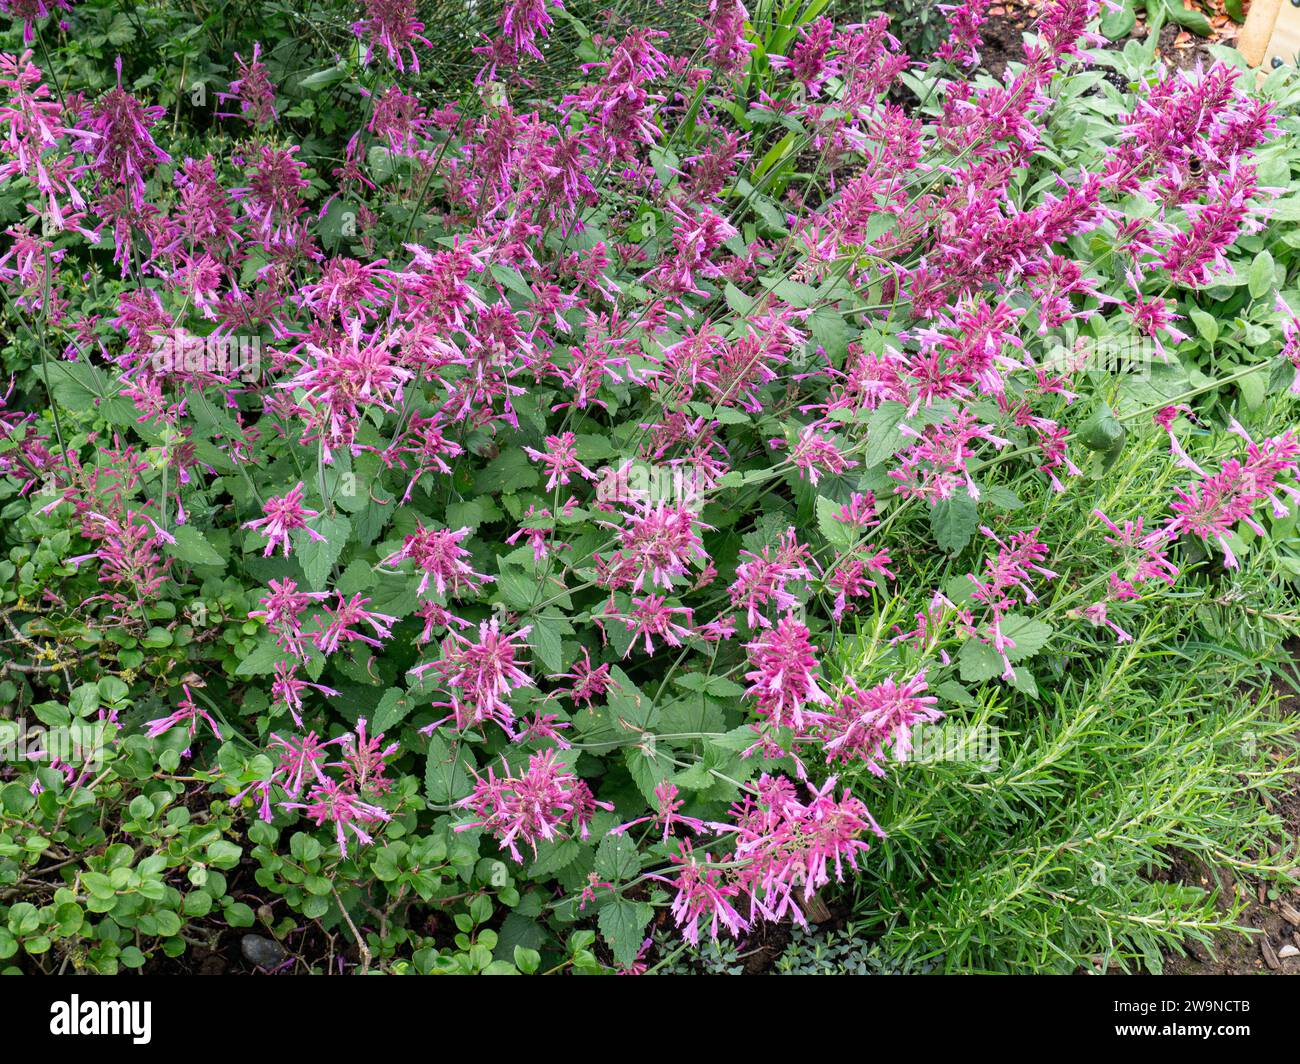 The deep pink flowers of the border perennial Agastache cana 'Heather Queen' Stock Photo